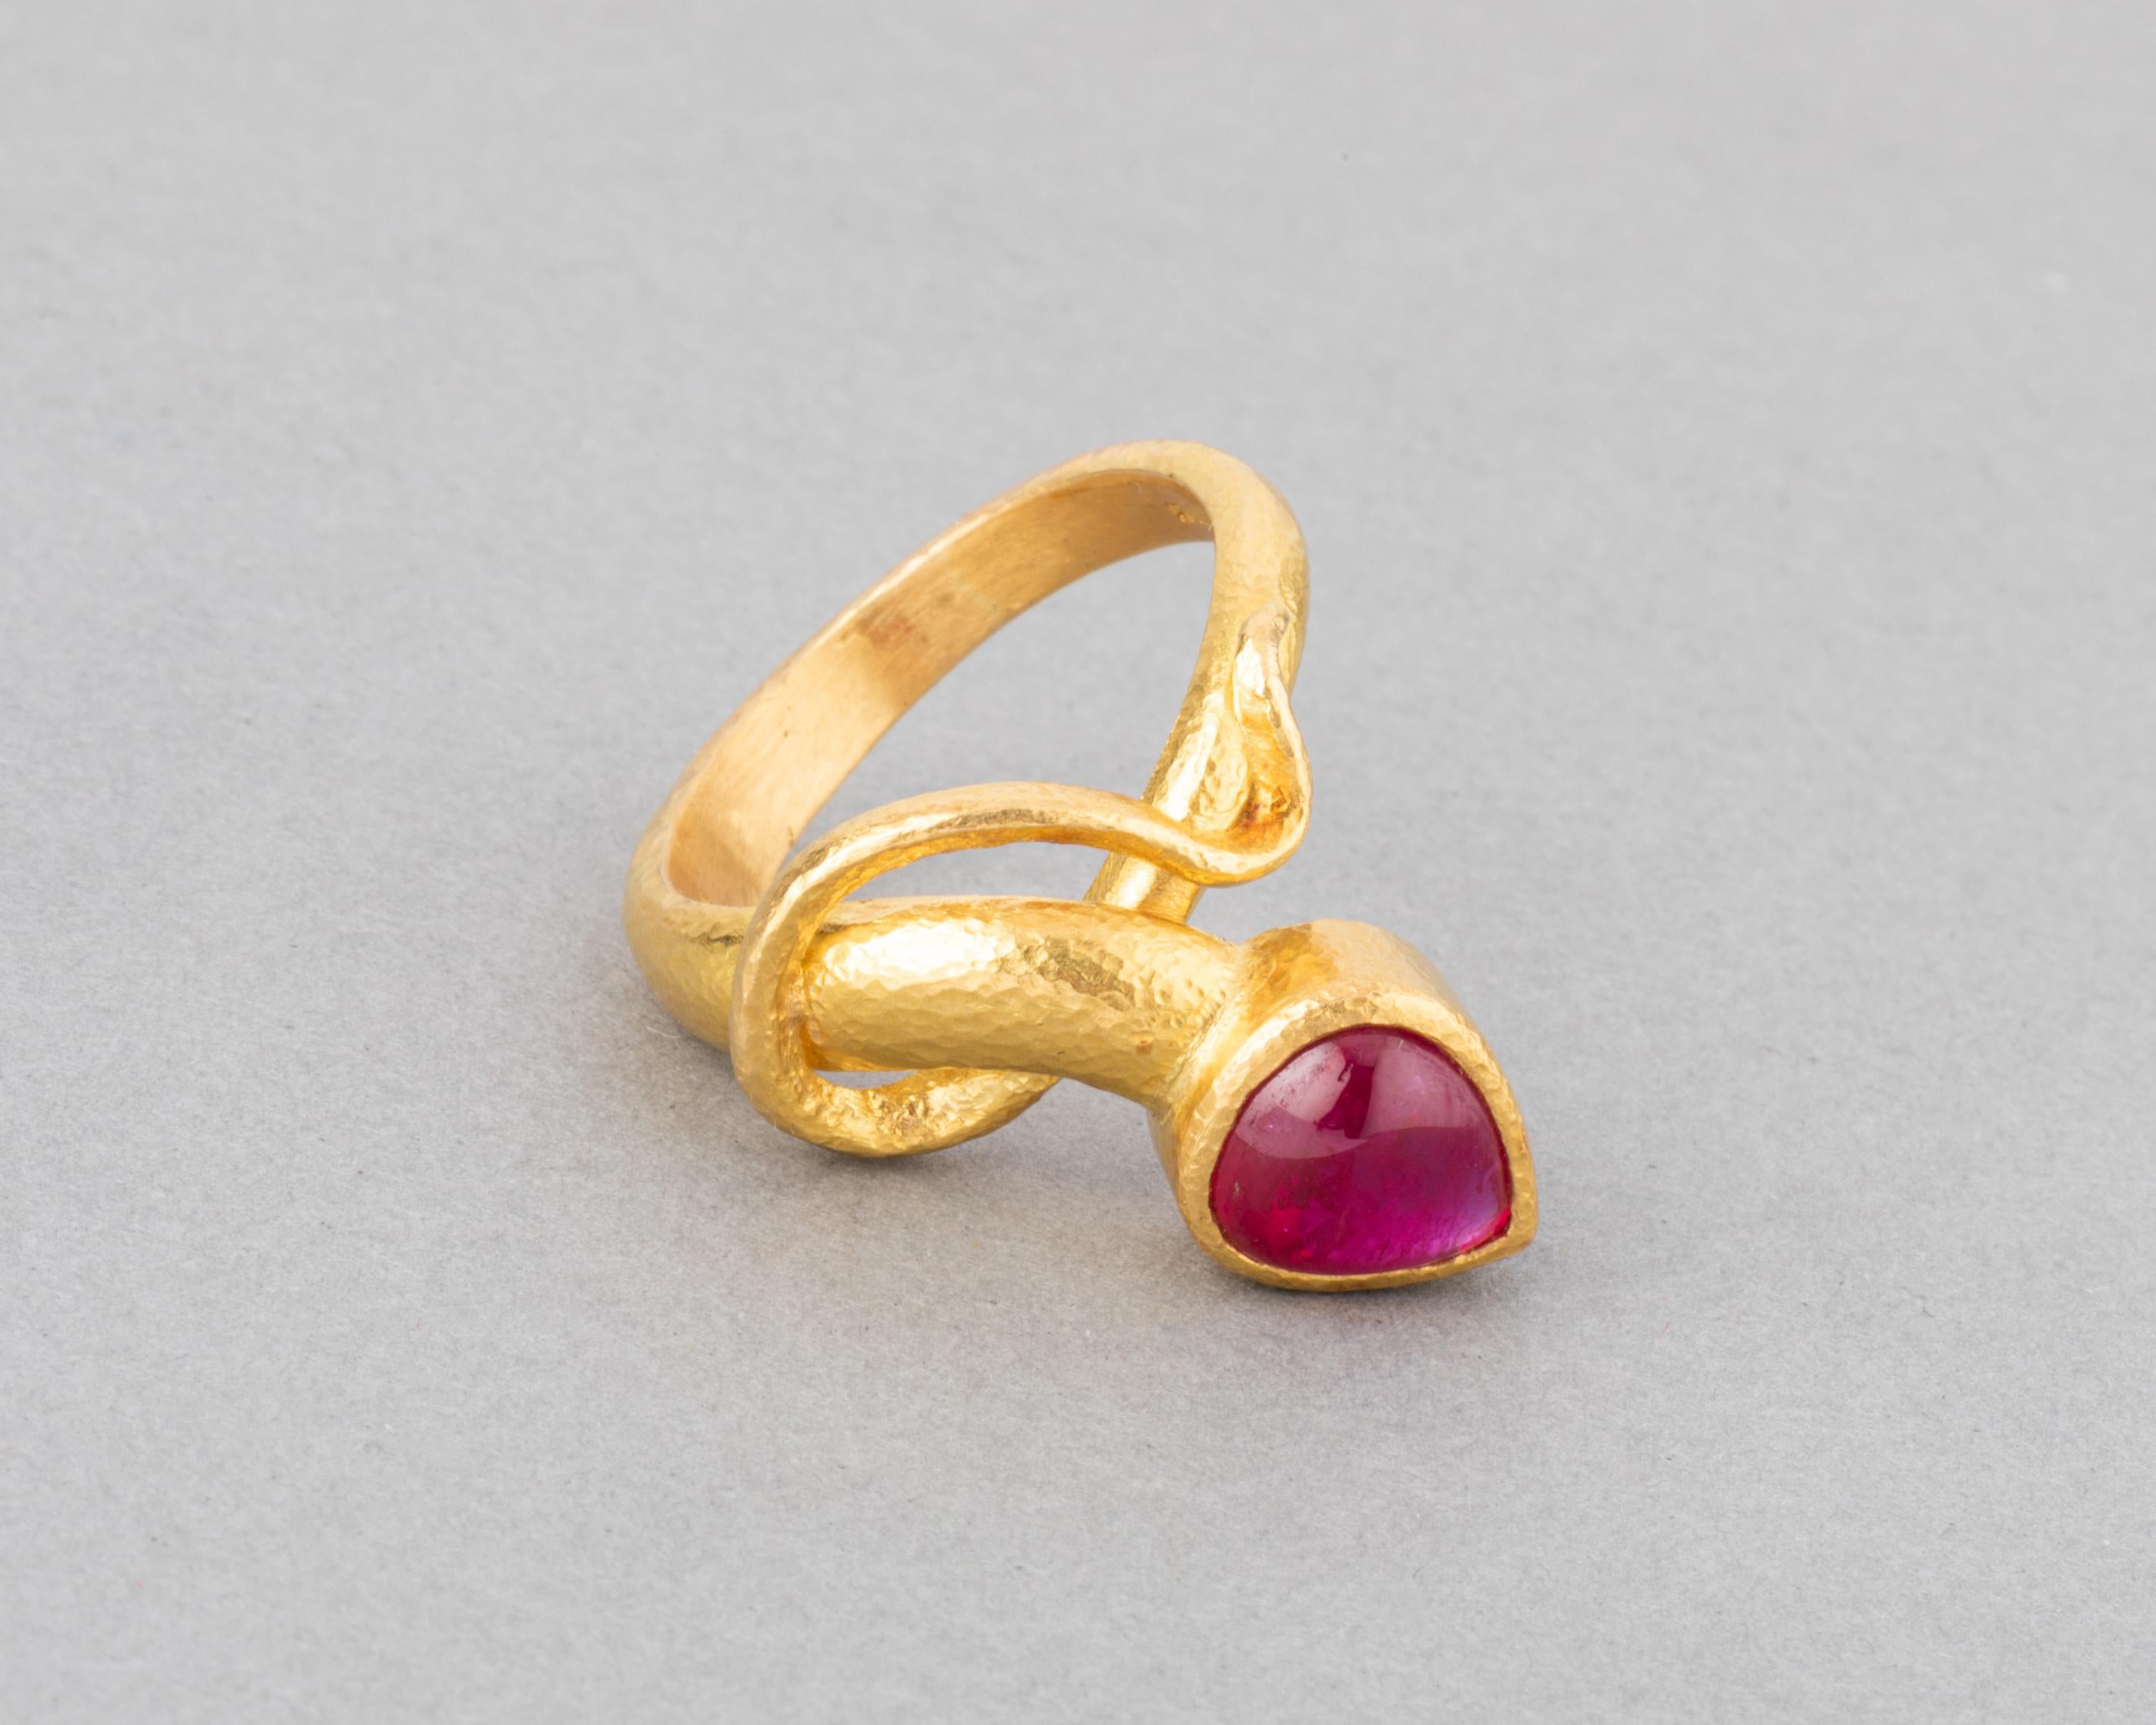 Beautiful creator ring, made by French Jeweler Bernardeau.
Gold 22k and one Ruby cabochon. The ruby weights 1.50/2 carats approximately.
Finger size is 54 or 6.60 USA.
Total weight: 12.80 grams